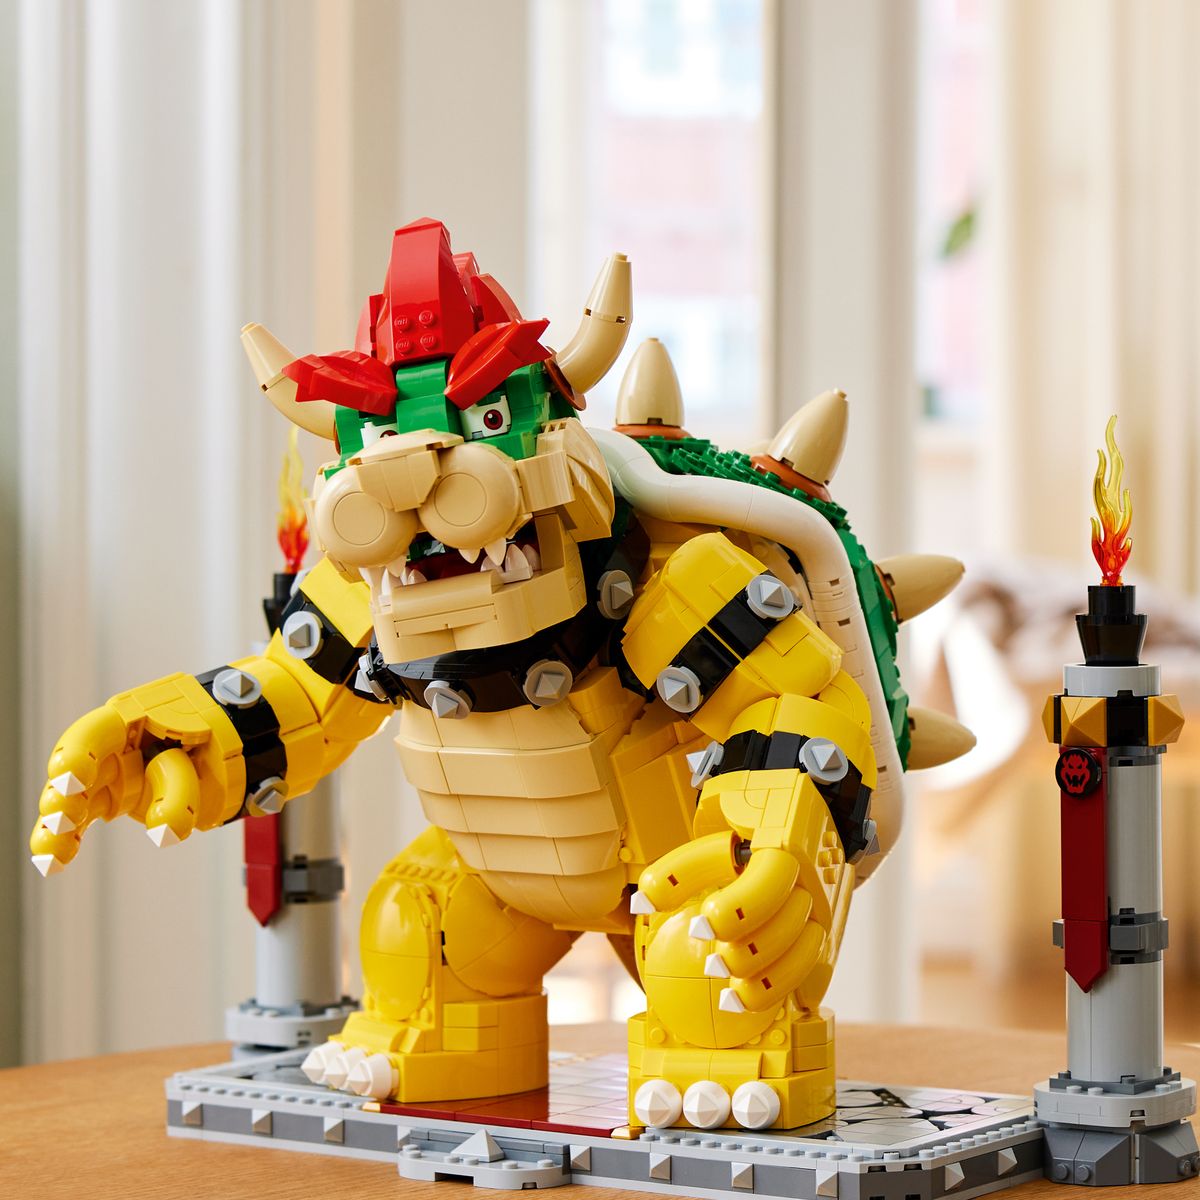 The Mighty Bowser is a 32cm Tall LEGO Monstrosity